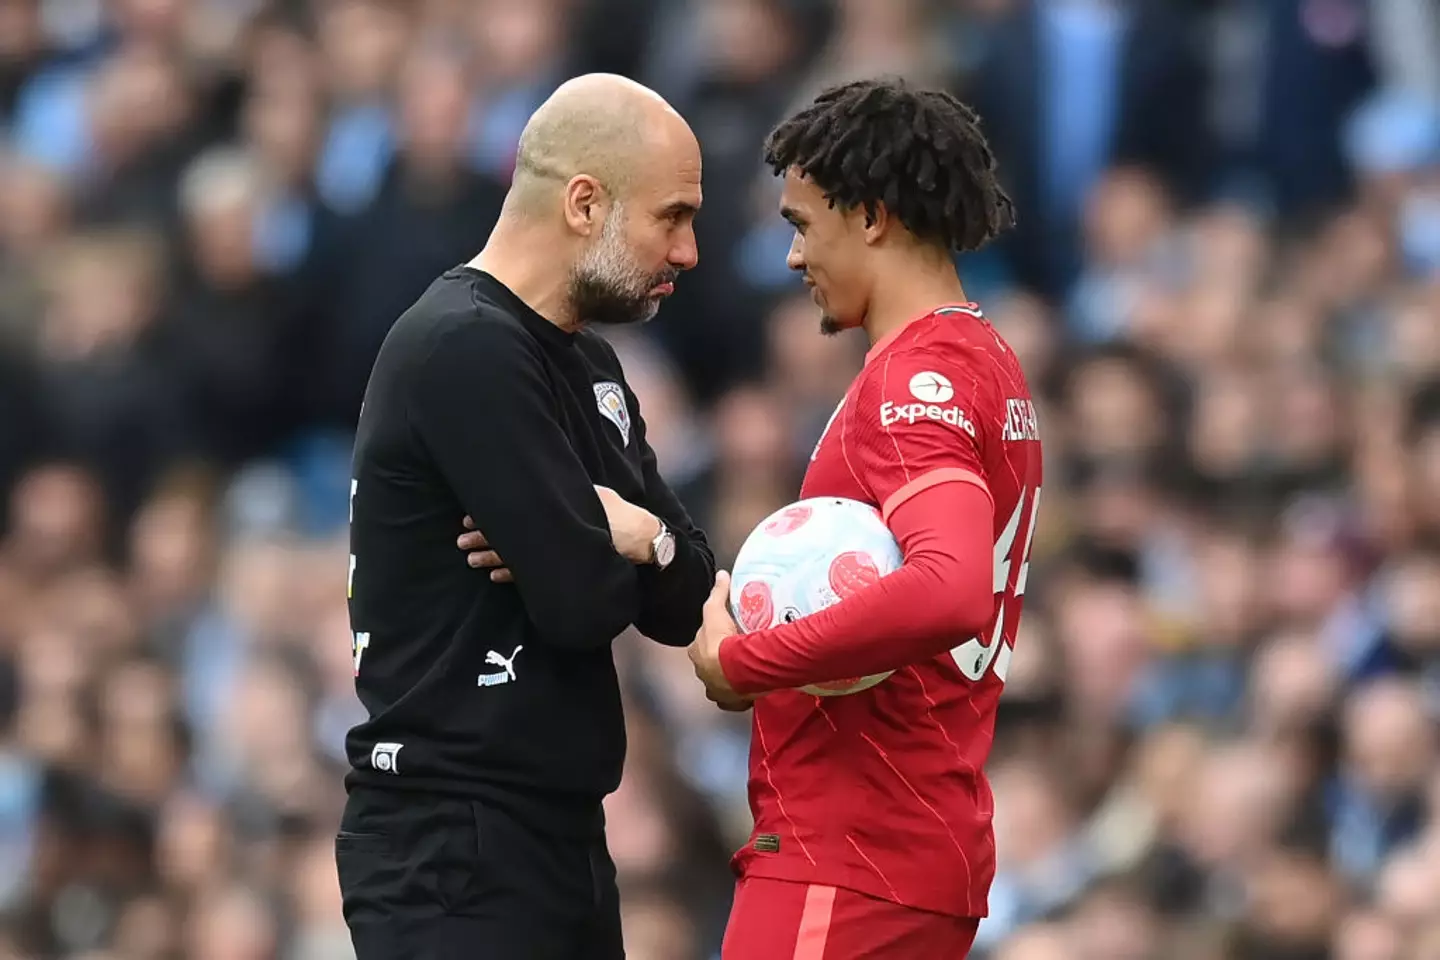 Guardiola has responded to Alexander-Arnold (Image: Getty)